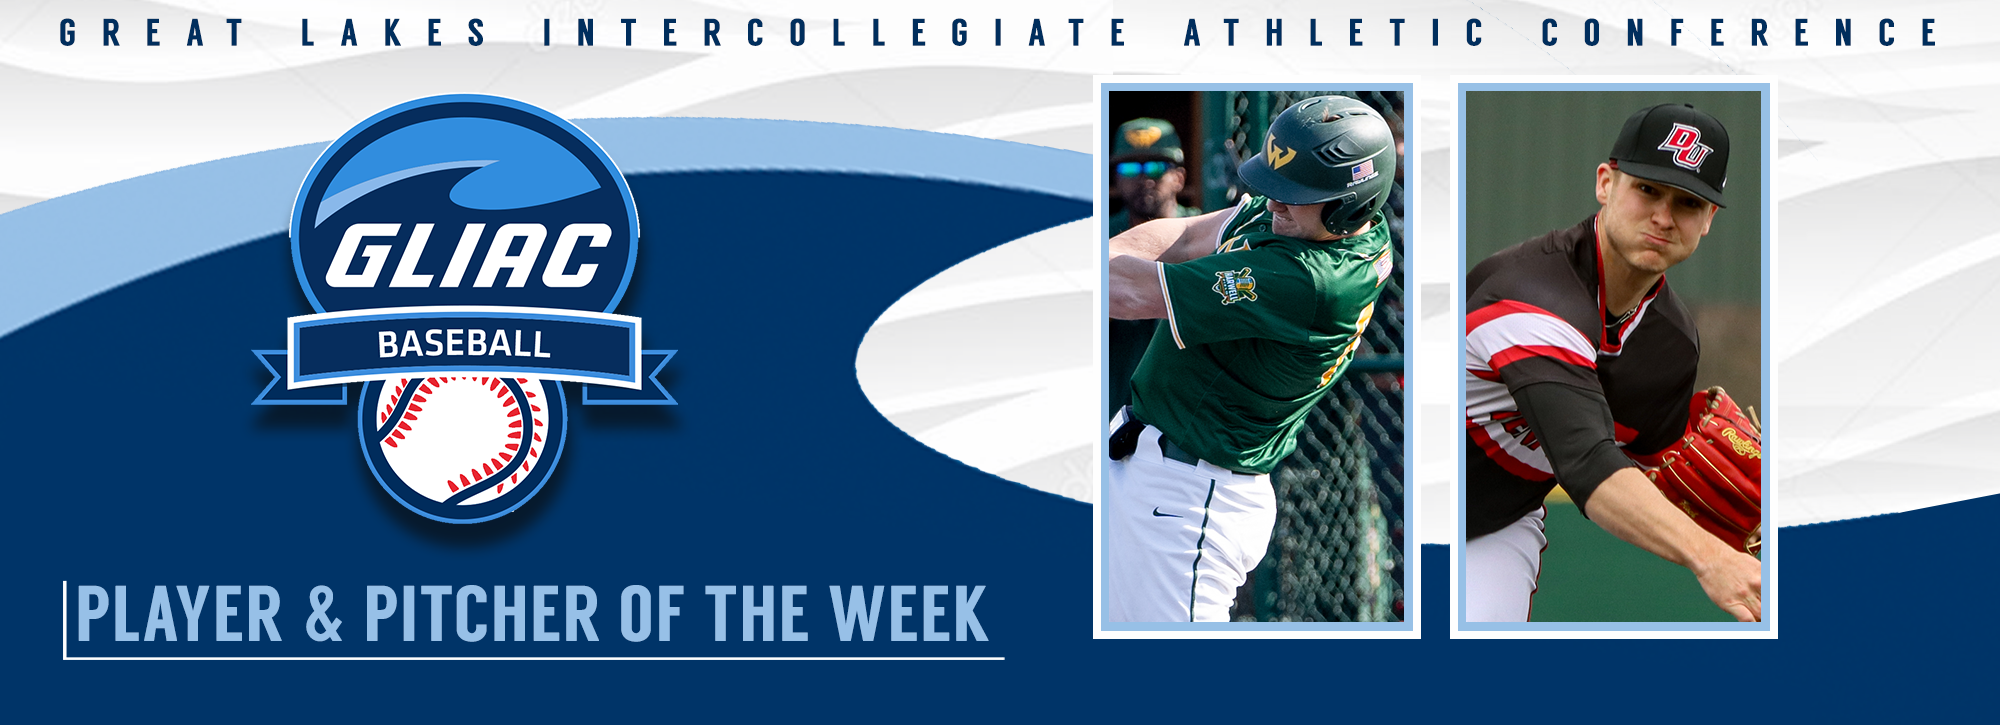 WSU's Hitzelberger and DU's Fischer honored with weekly GLIAC baseball awards